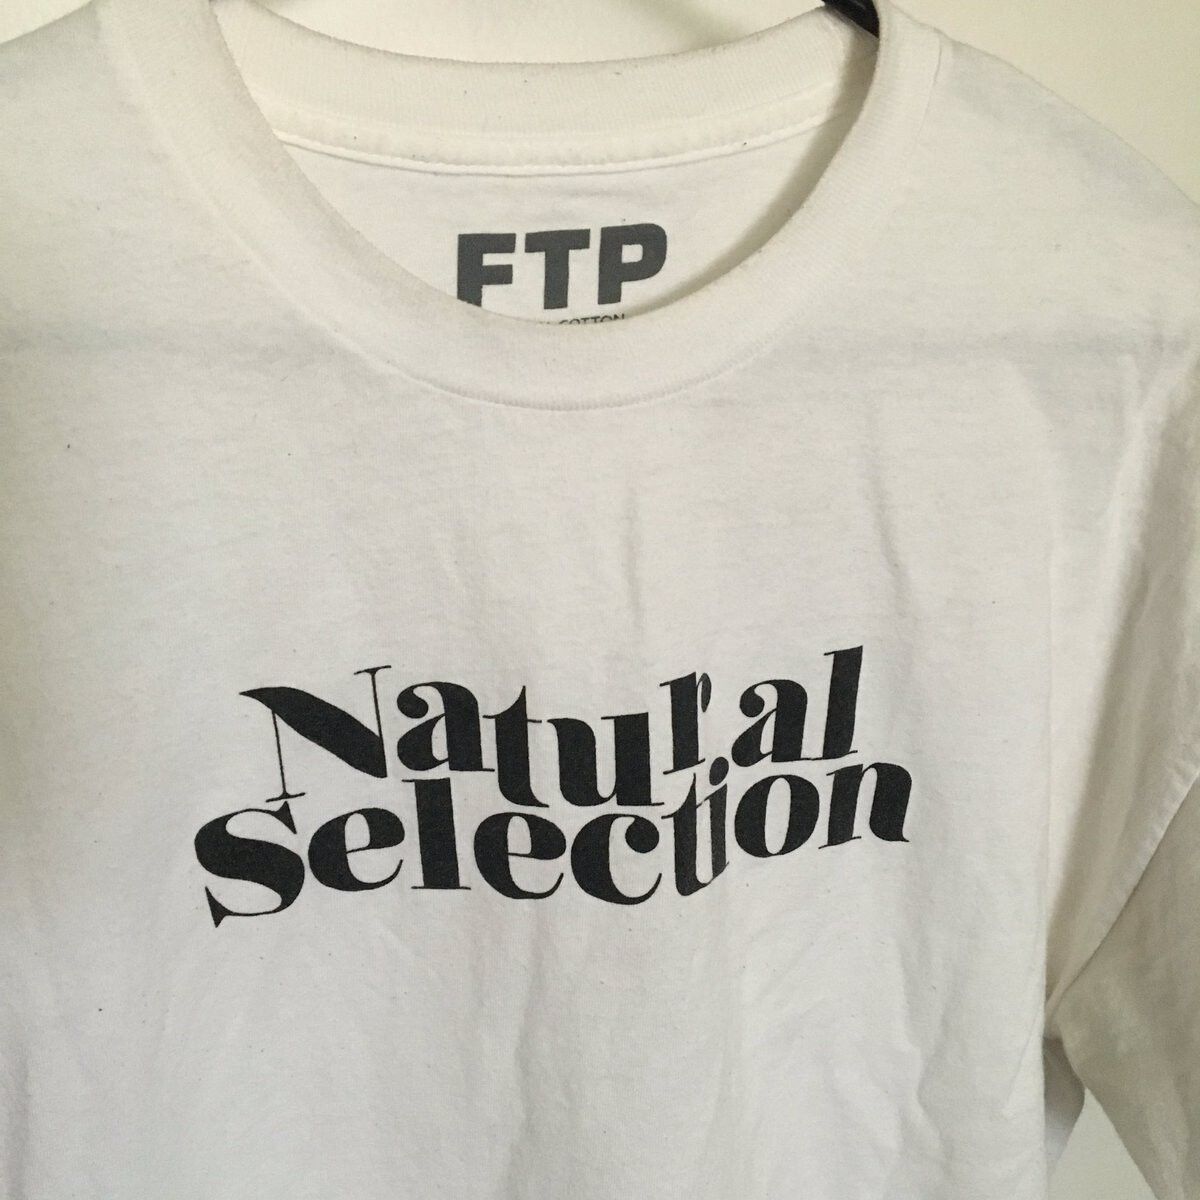 Fuck The Population FTP Natural Selection Columbine Tee Size US XL / EU 56 / 4 - 2 Preview